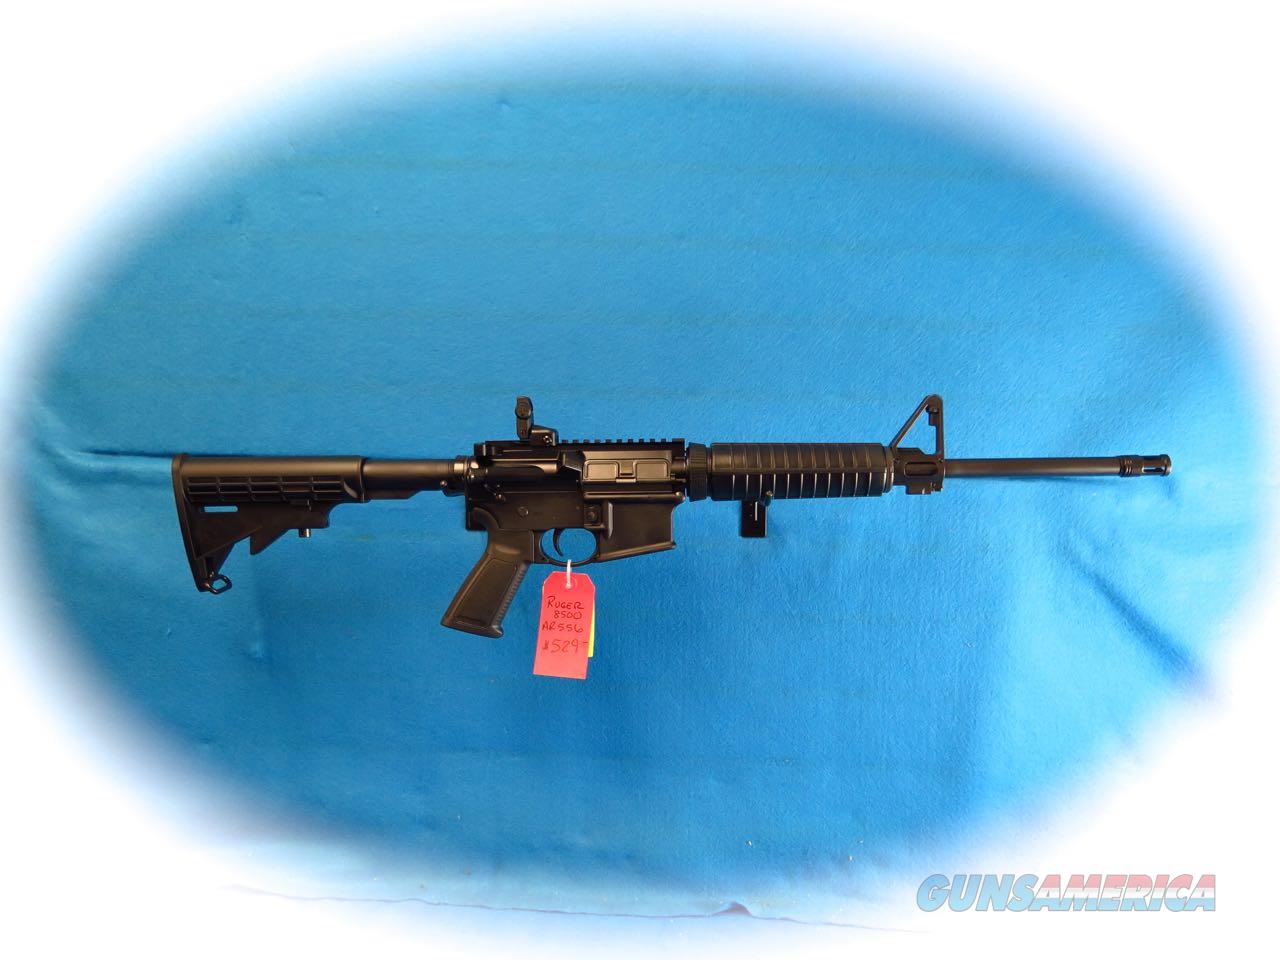 Ruger Ar 556 Semi Auto 5 56mm Rifle Model 8500 For Sale